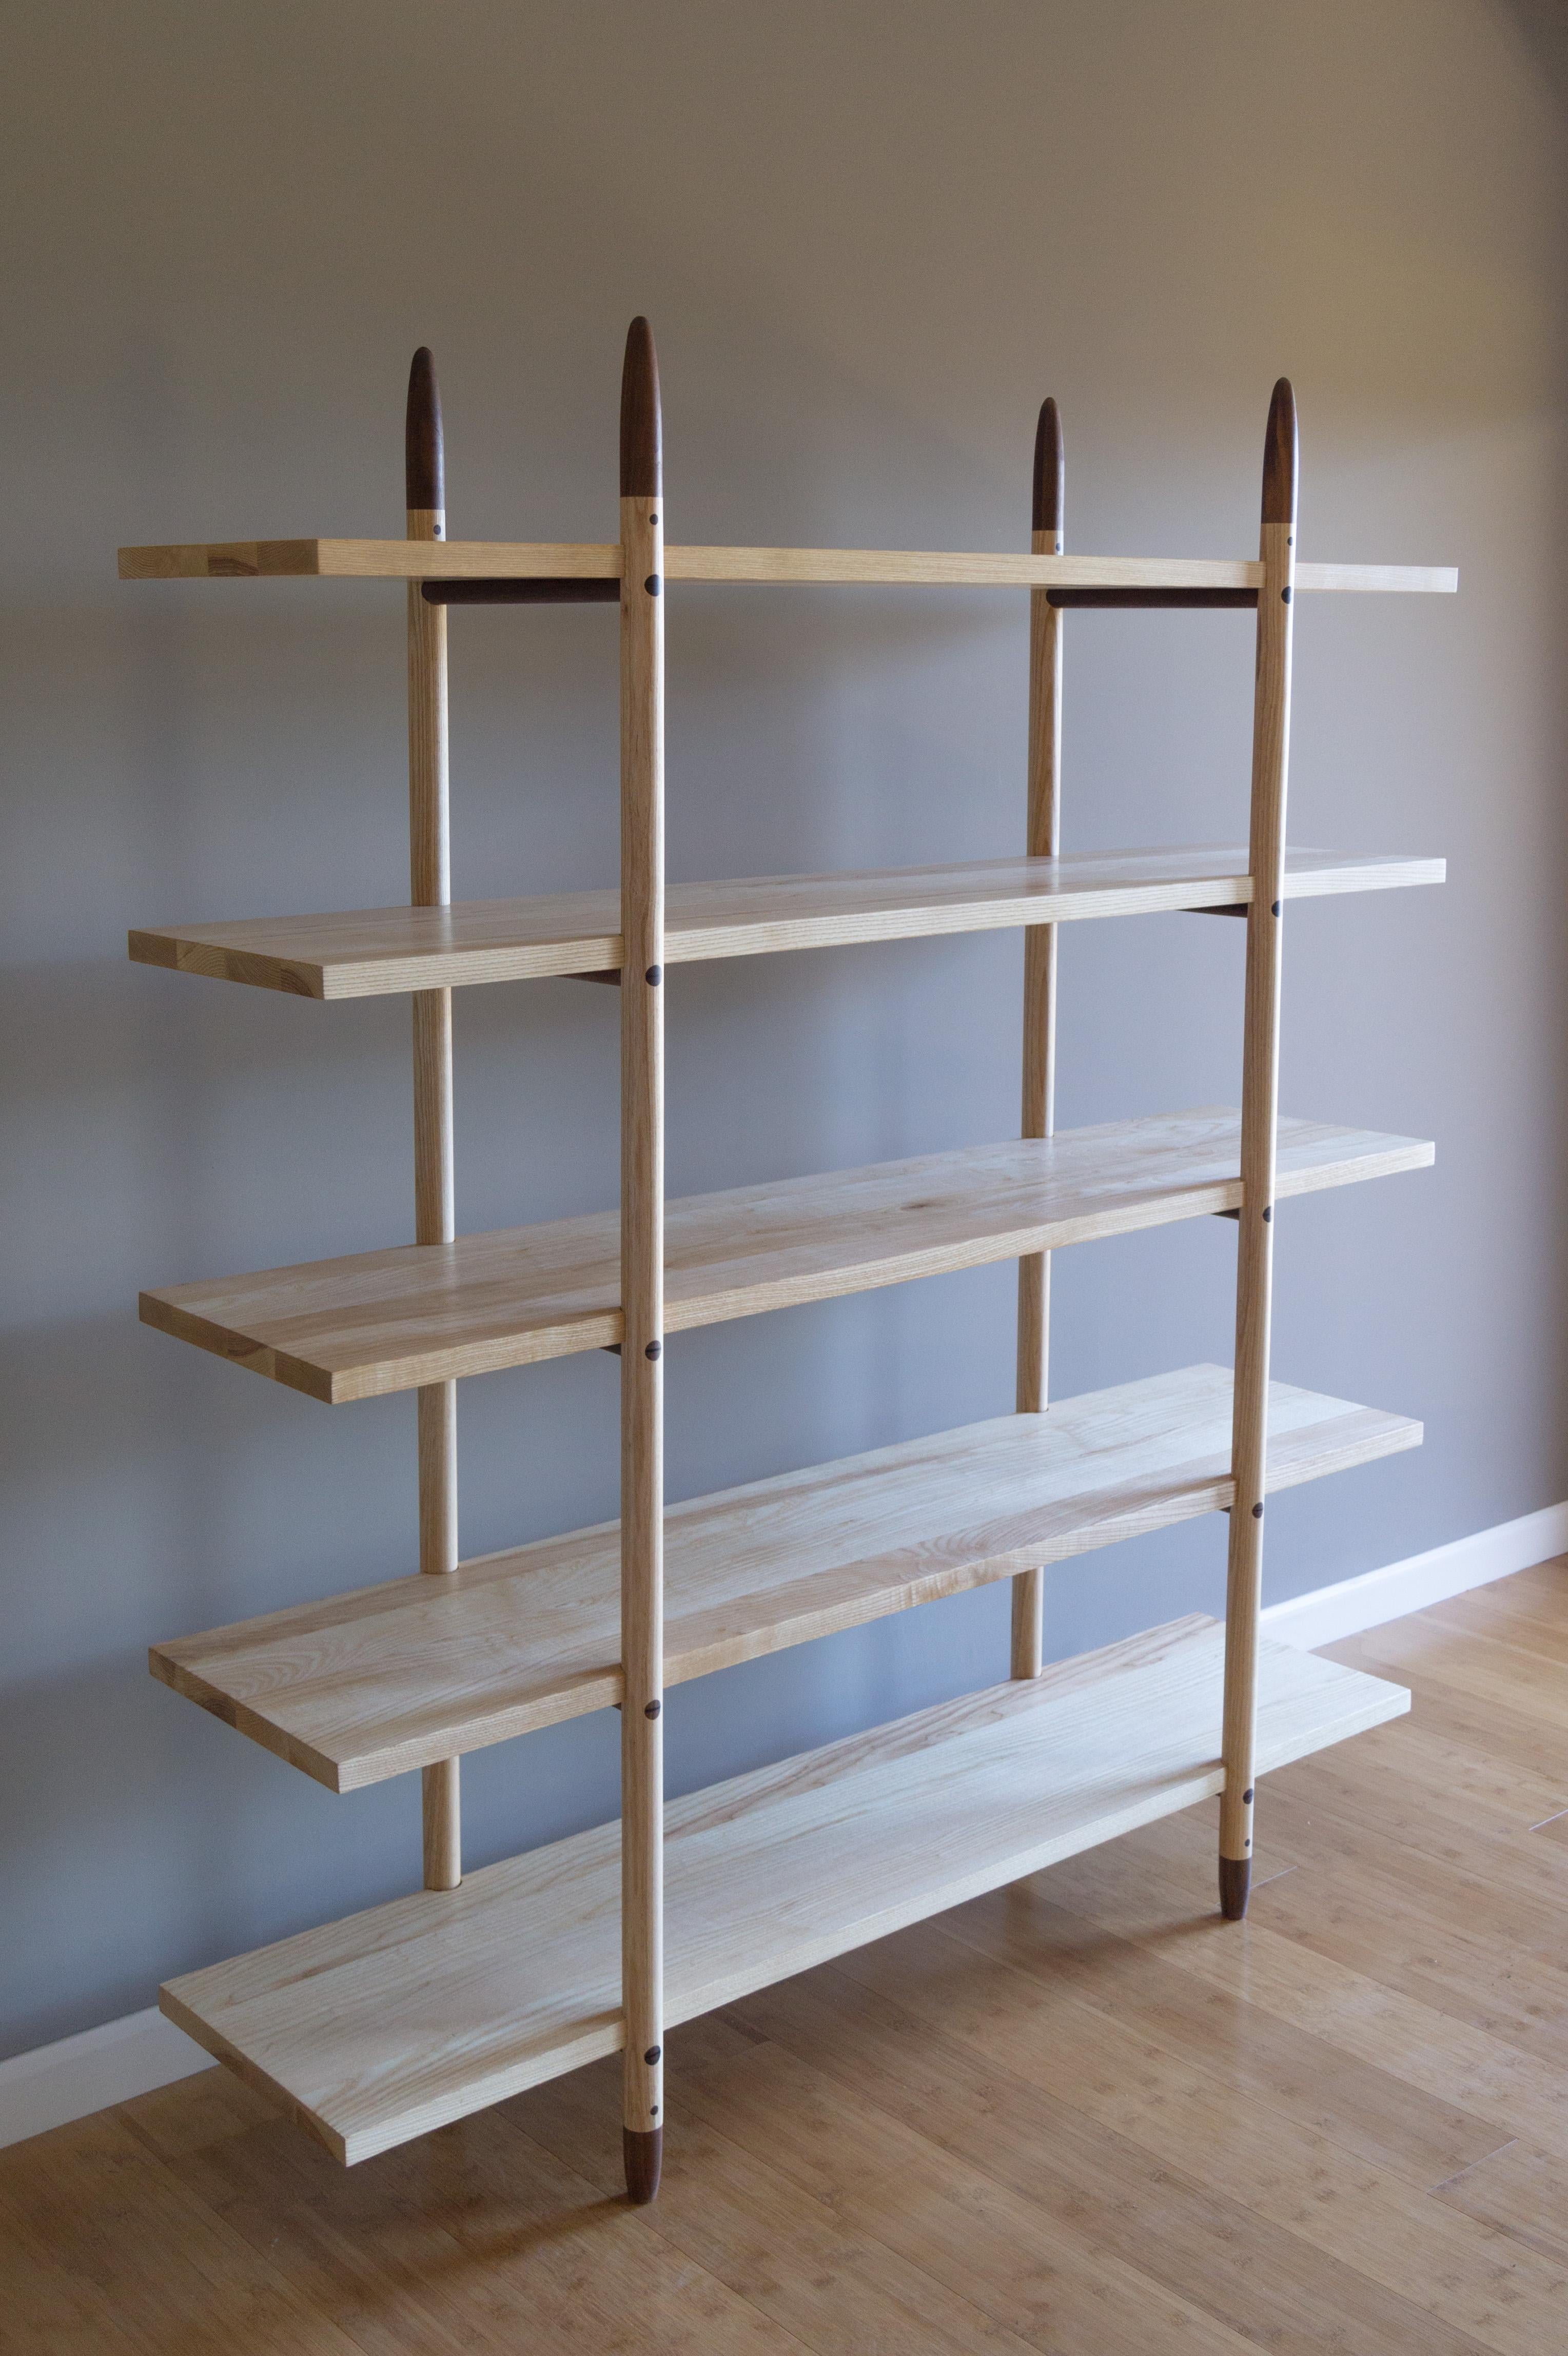 The Deepstep shelving includes exquisite wood detailing and a clean, clear profile. Designed entirely without fasteners or screws, using a mix of traditional and innovative wood joinery instead. 

Handmade with the highest level of craftsmanship